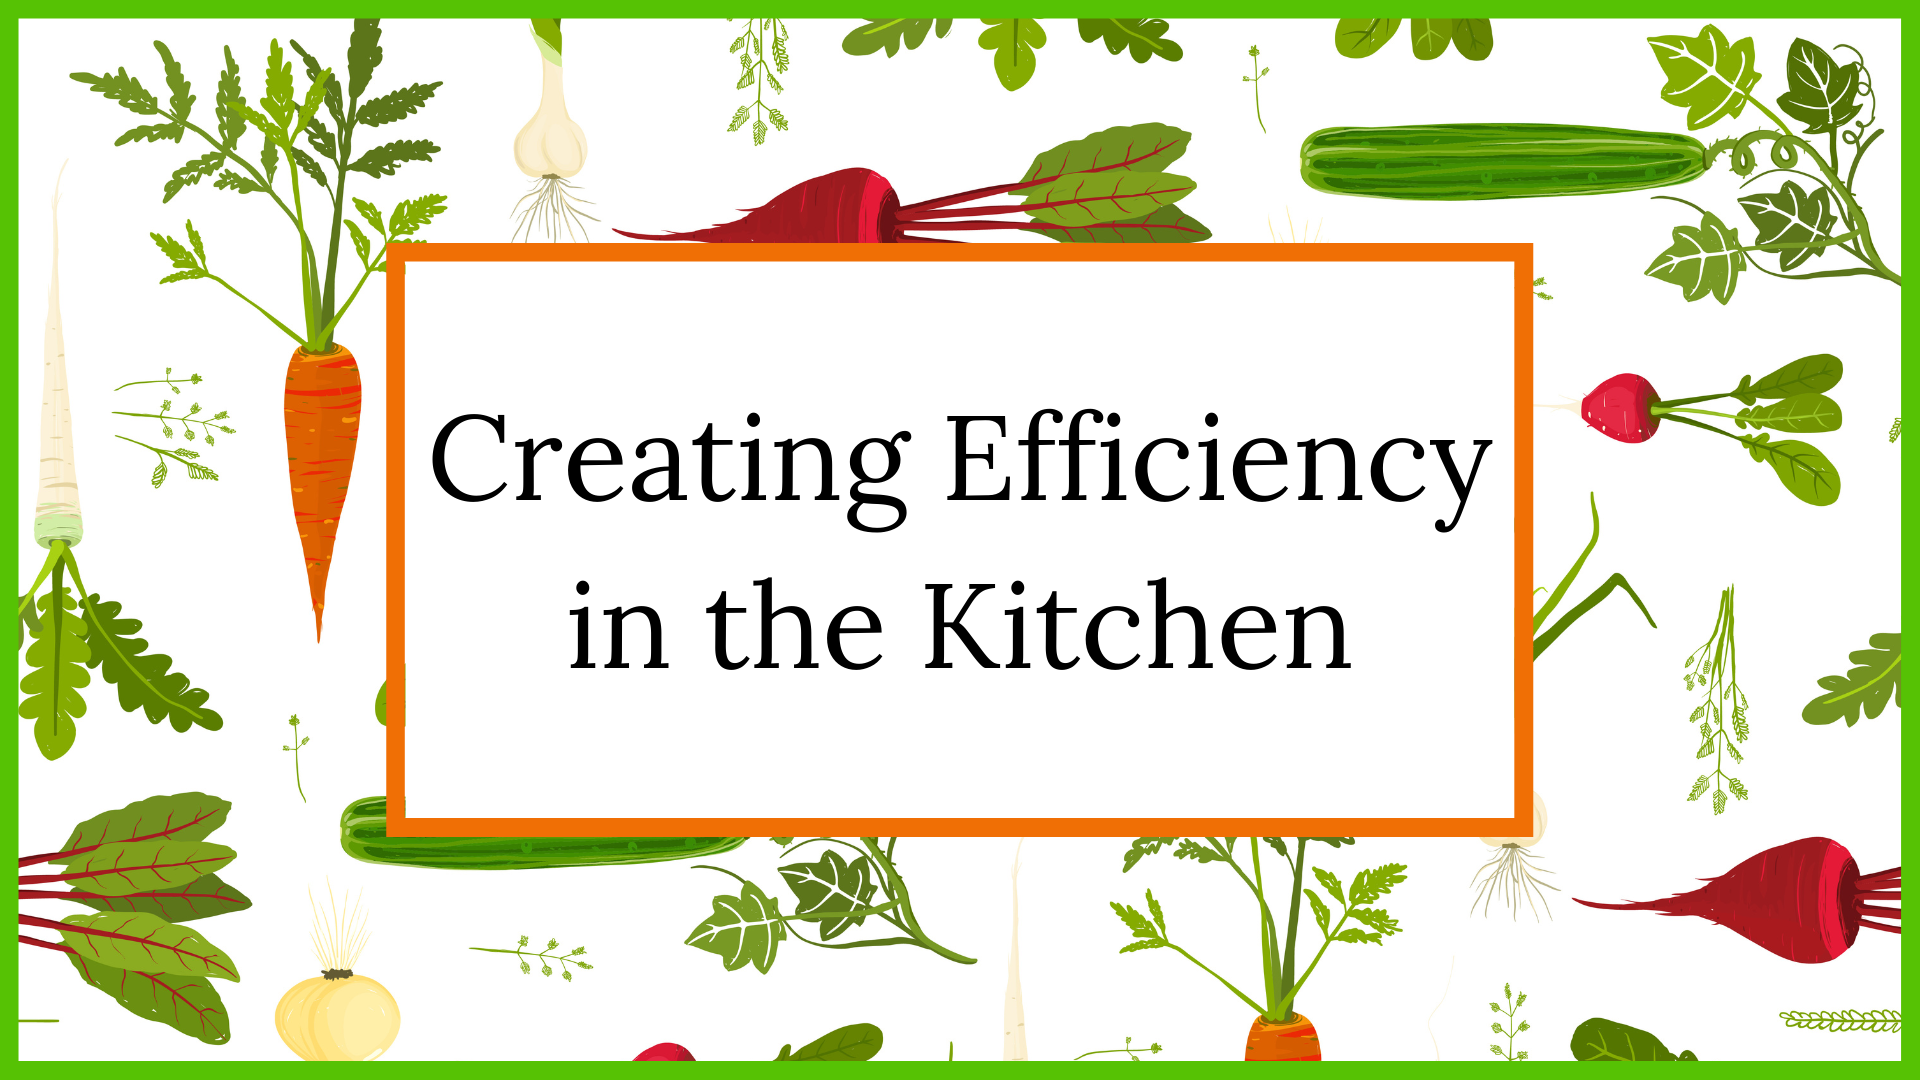 Creating Efficiency in the Kitchen